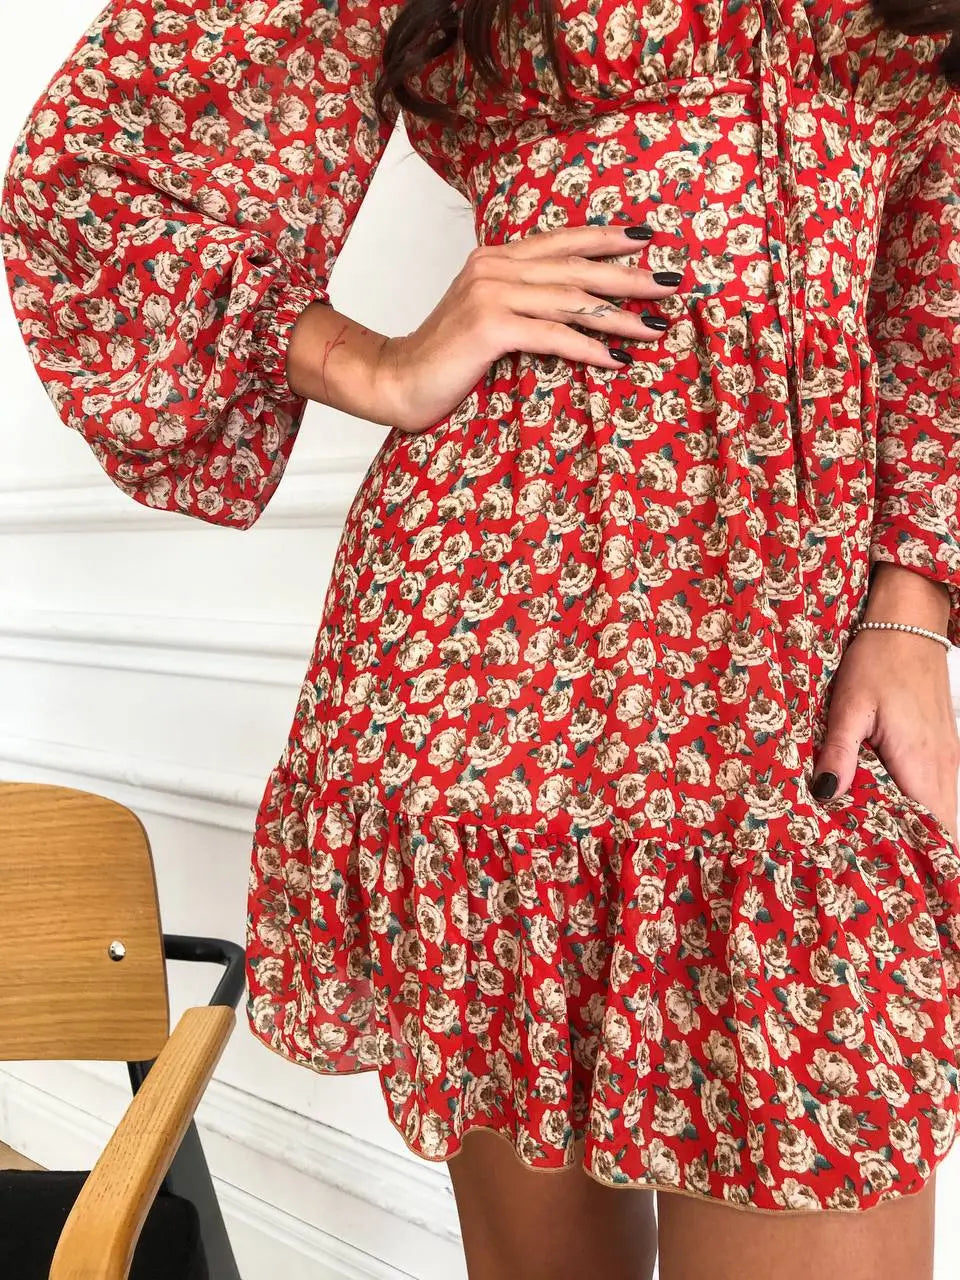 Red floral dress "Collar"